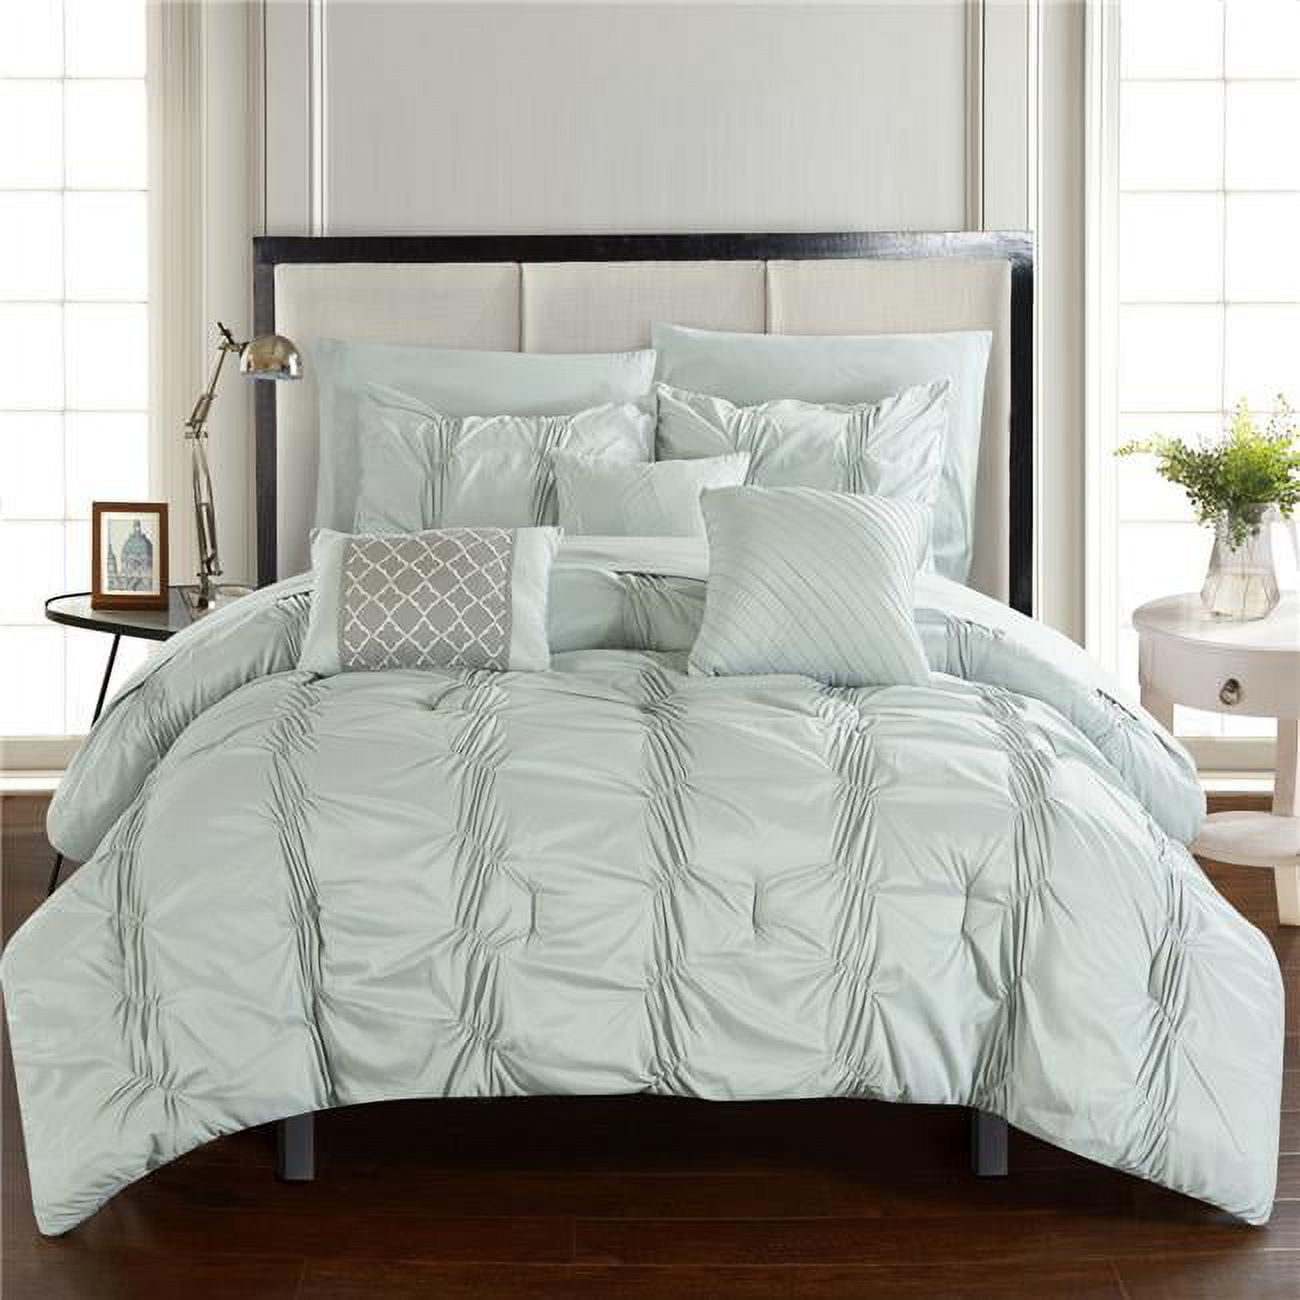 CS2557-US Aryan Pinch Pleated, Ruffled & Pleated Complete Bed in a Bag Comforter Set with Sheets & Decorative Pillows - Green - King - 10 Piece -  Chic Home